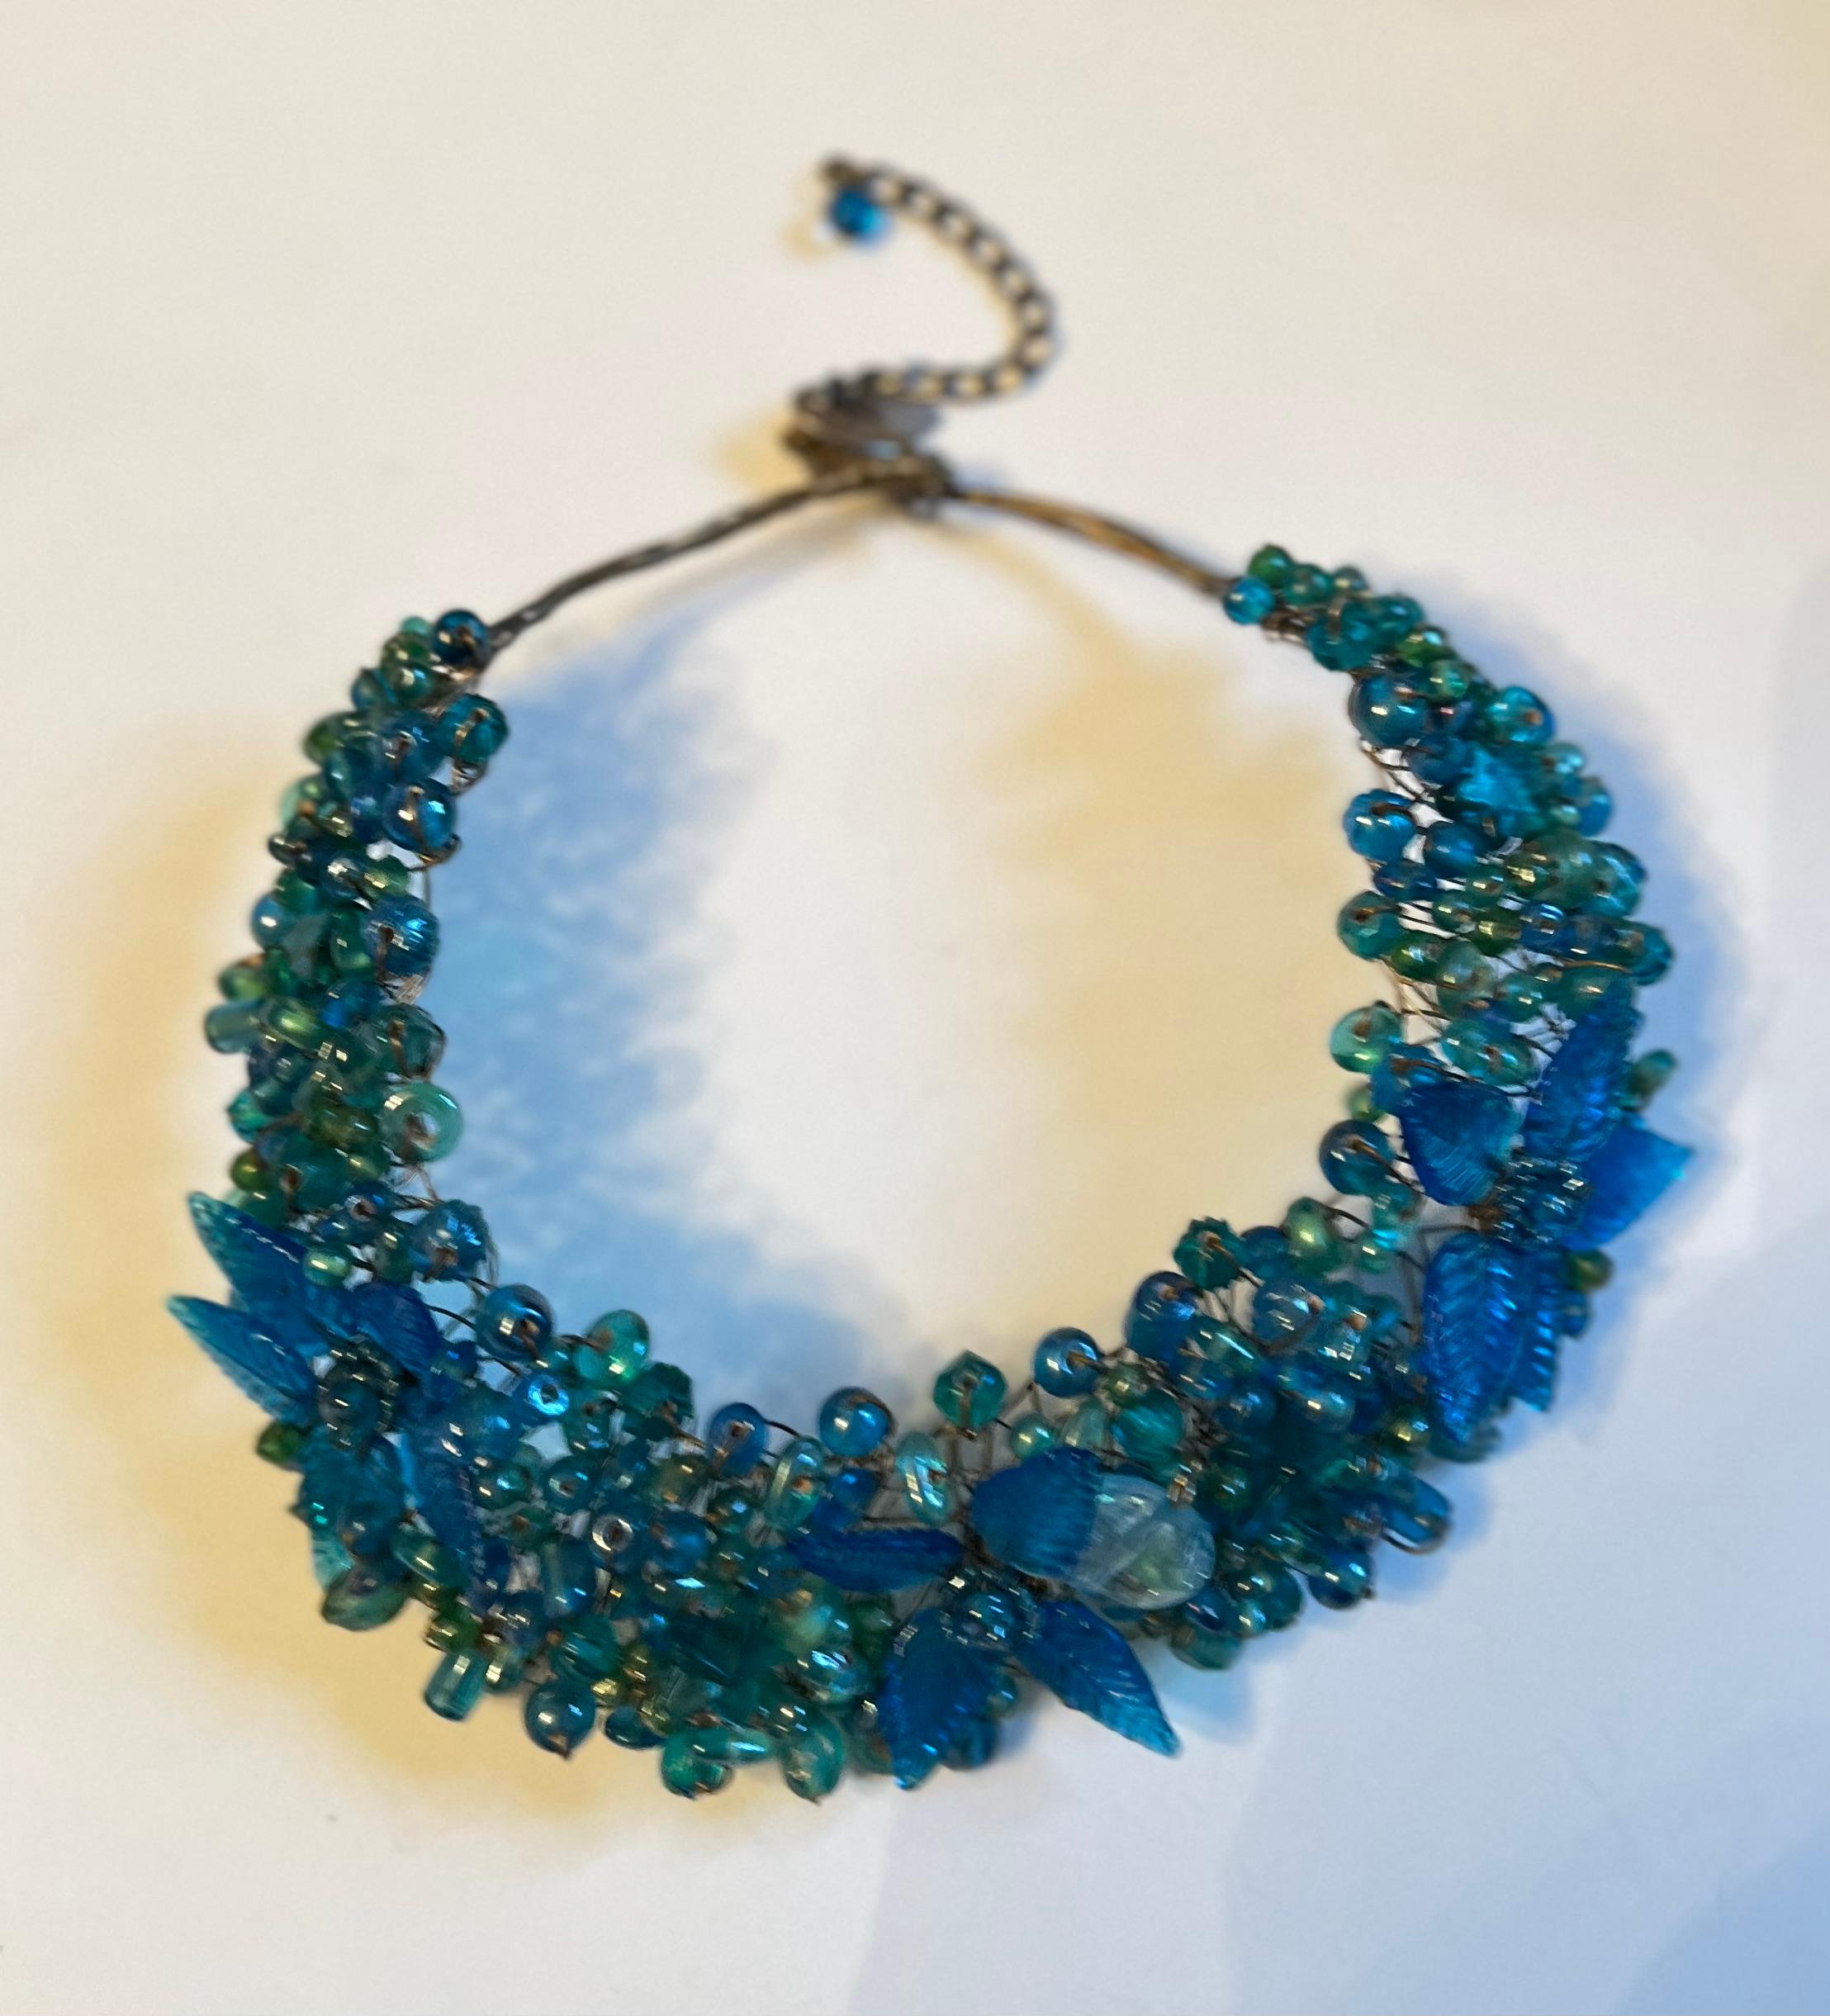 Hand-Crafted Necklace Chocker of Glass Cut Leaves and Berries For Sale